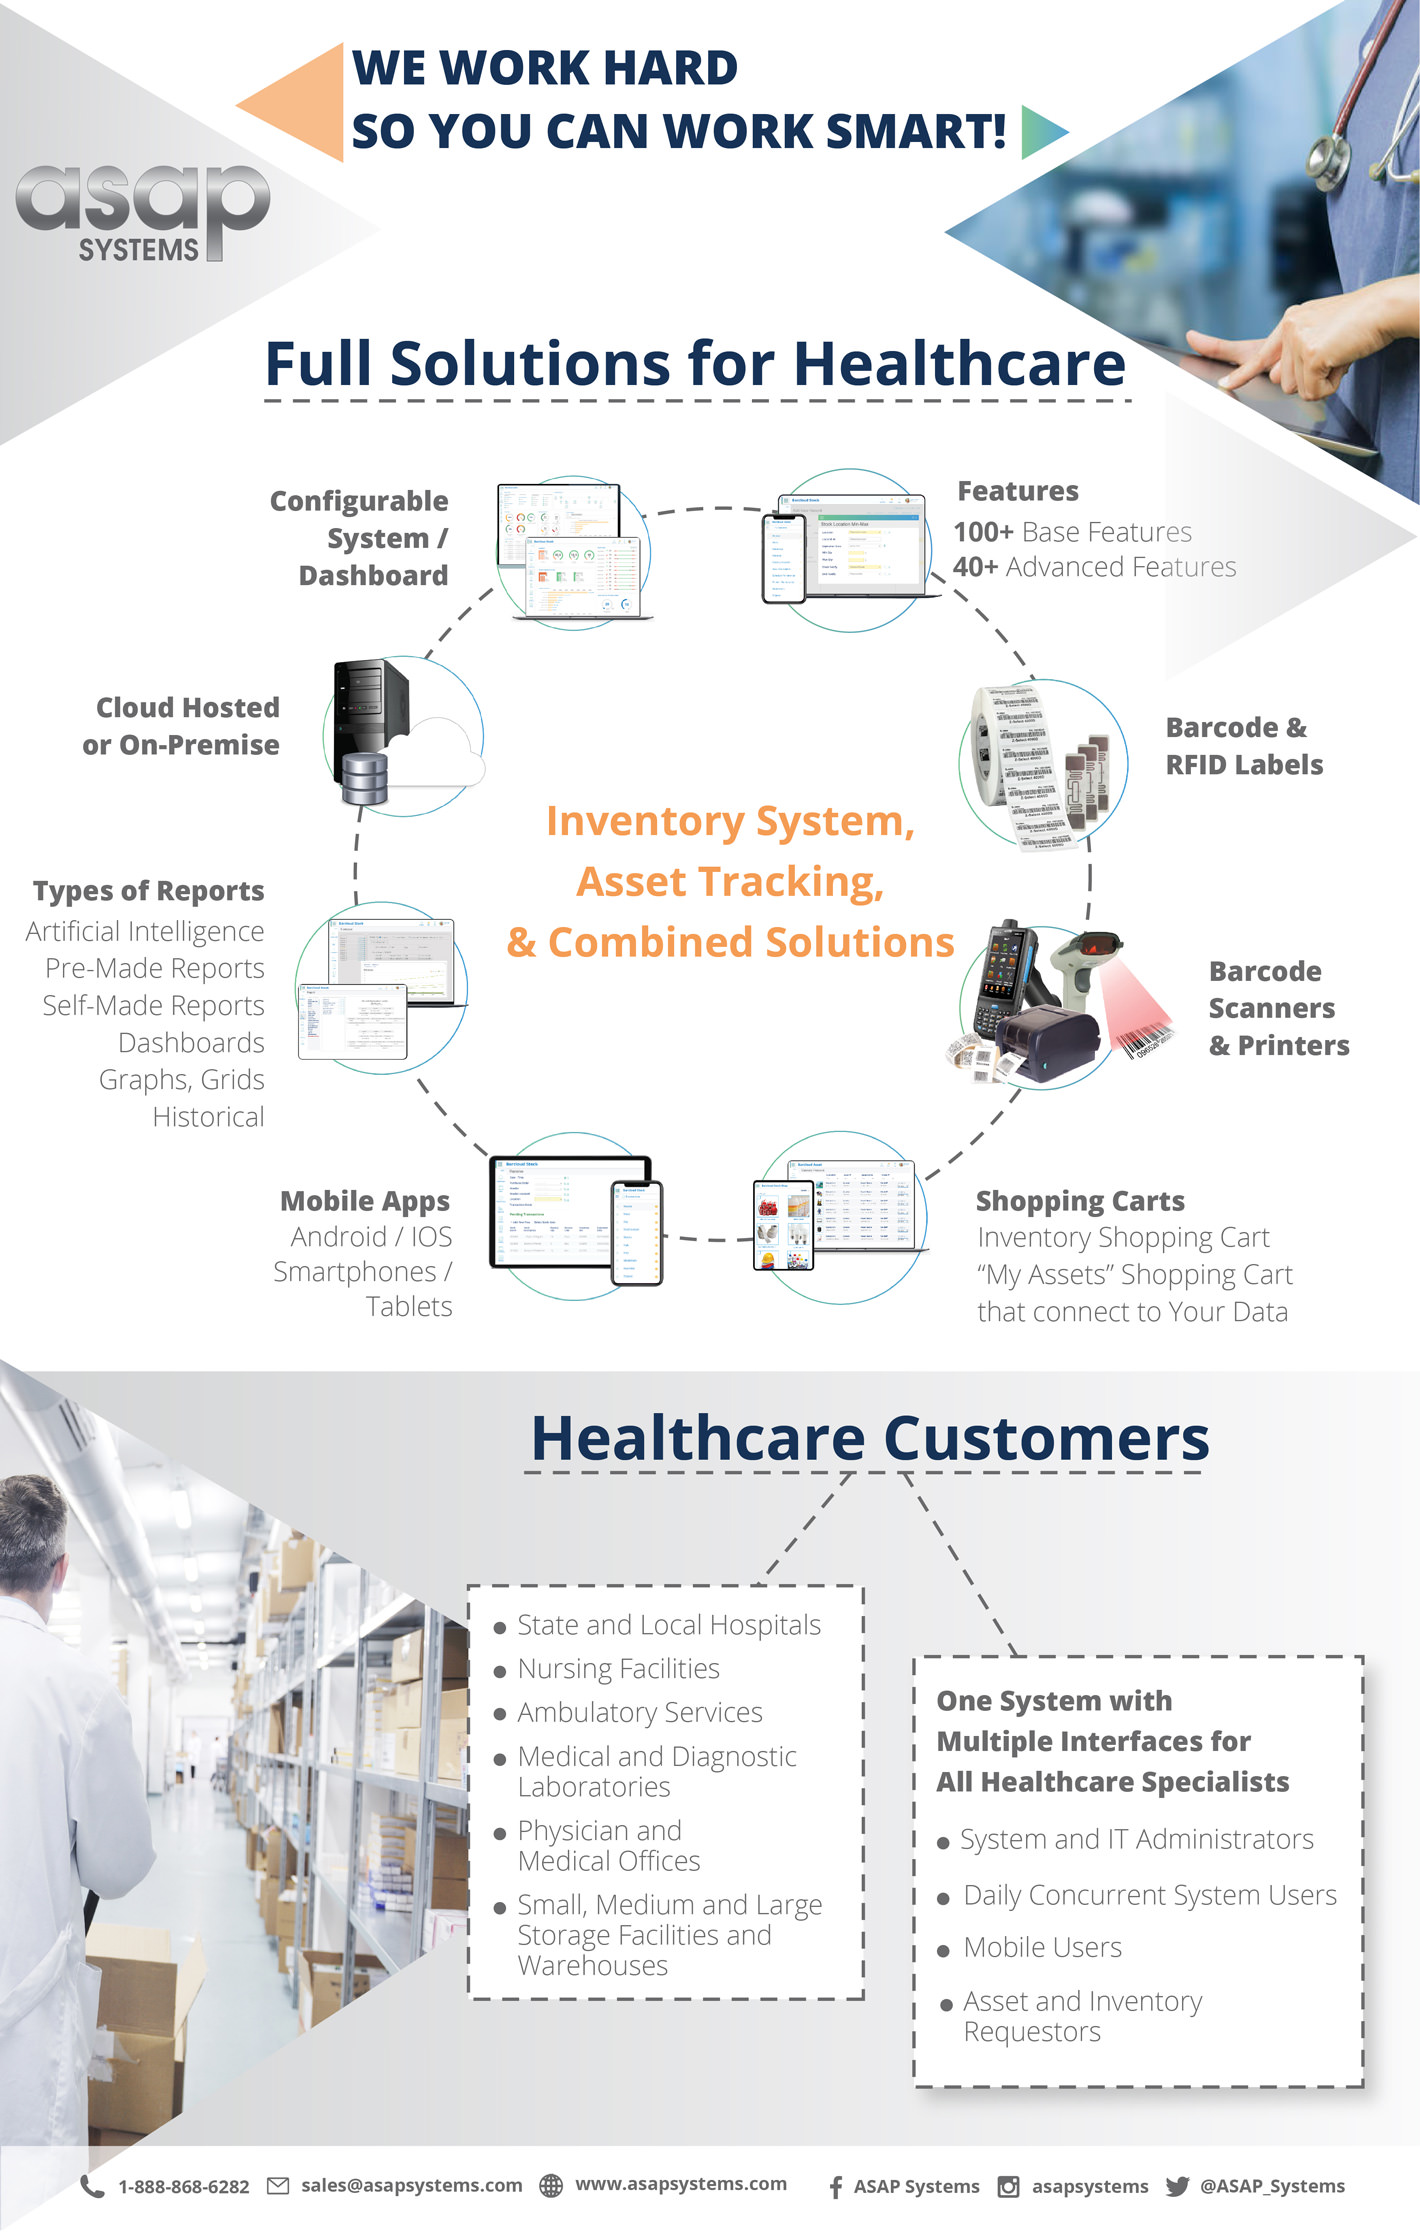 Inventory System Asset Tracking Full Solution for Healthcare